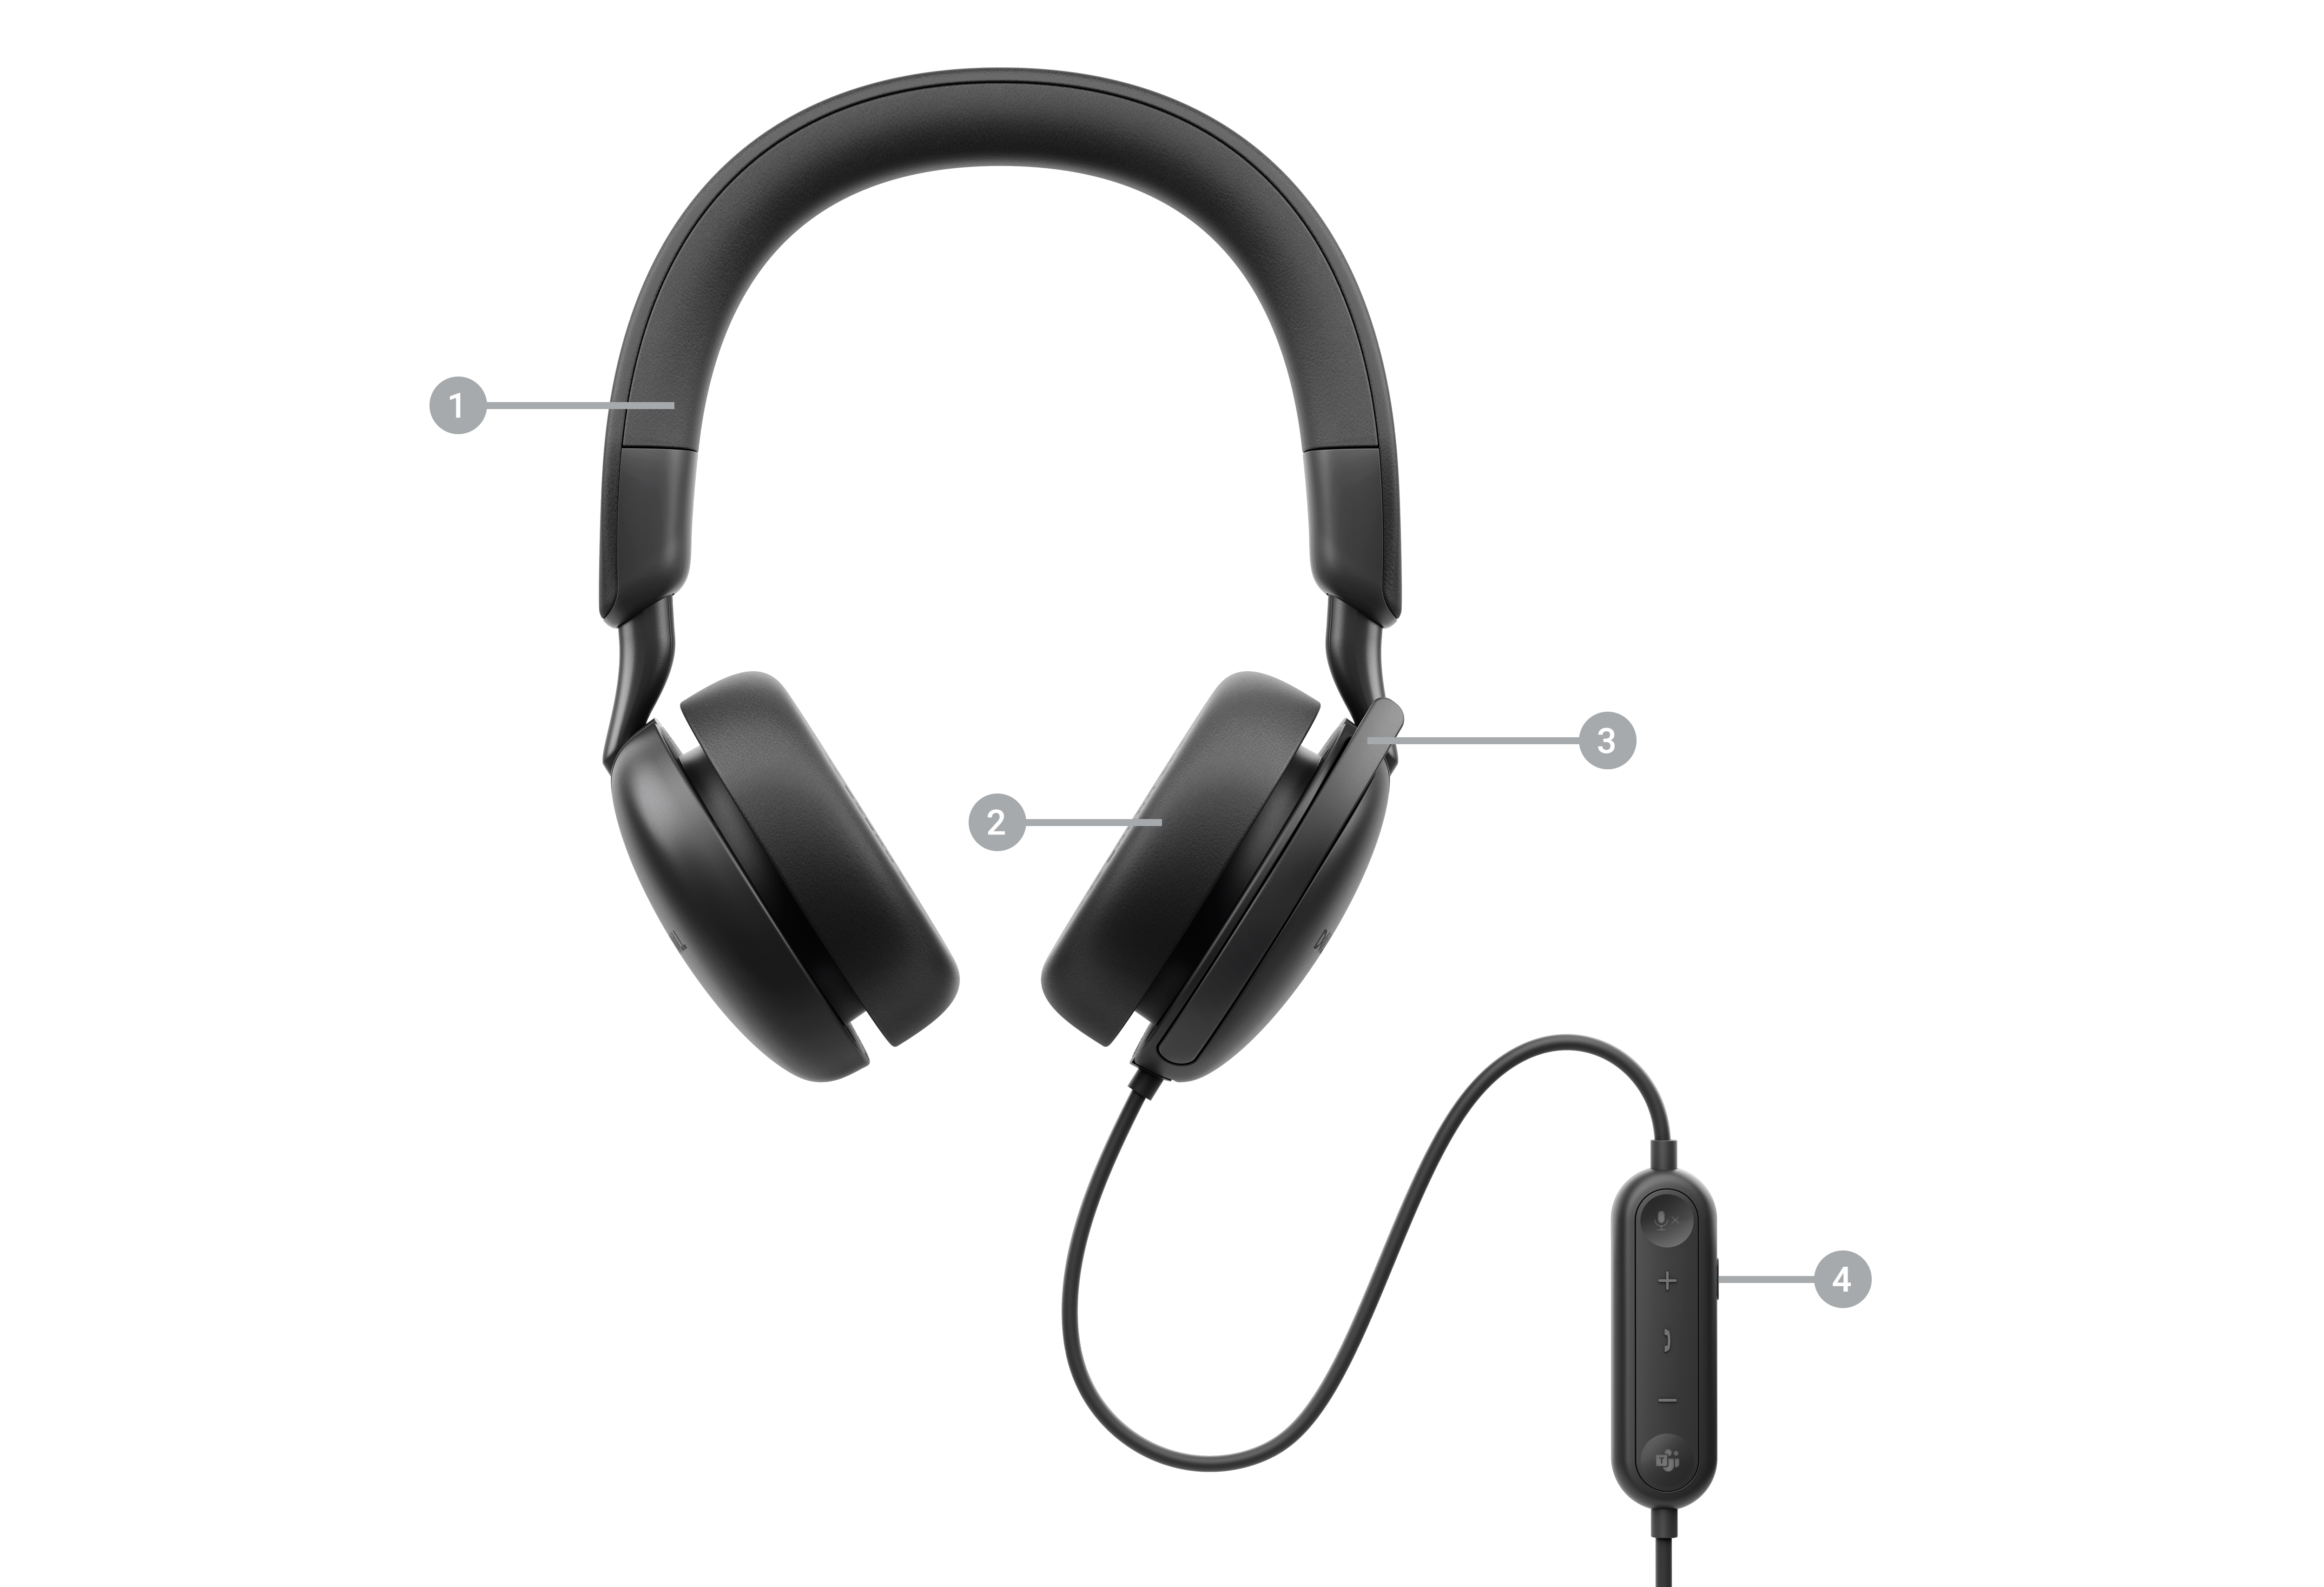 Dell WH5024 Pro Wired Headset with numbers from 1 to 4 showing the product features.